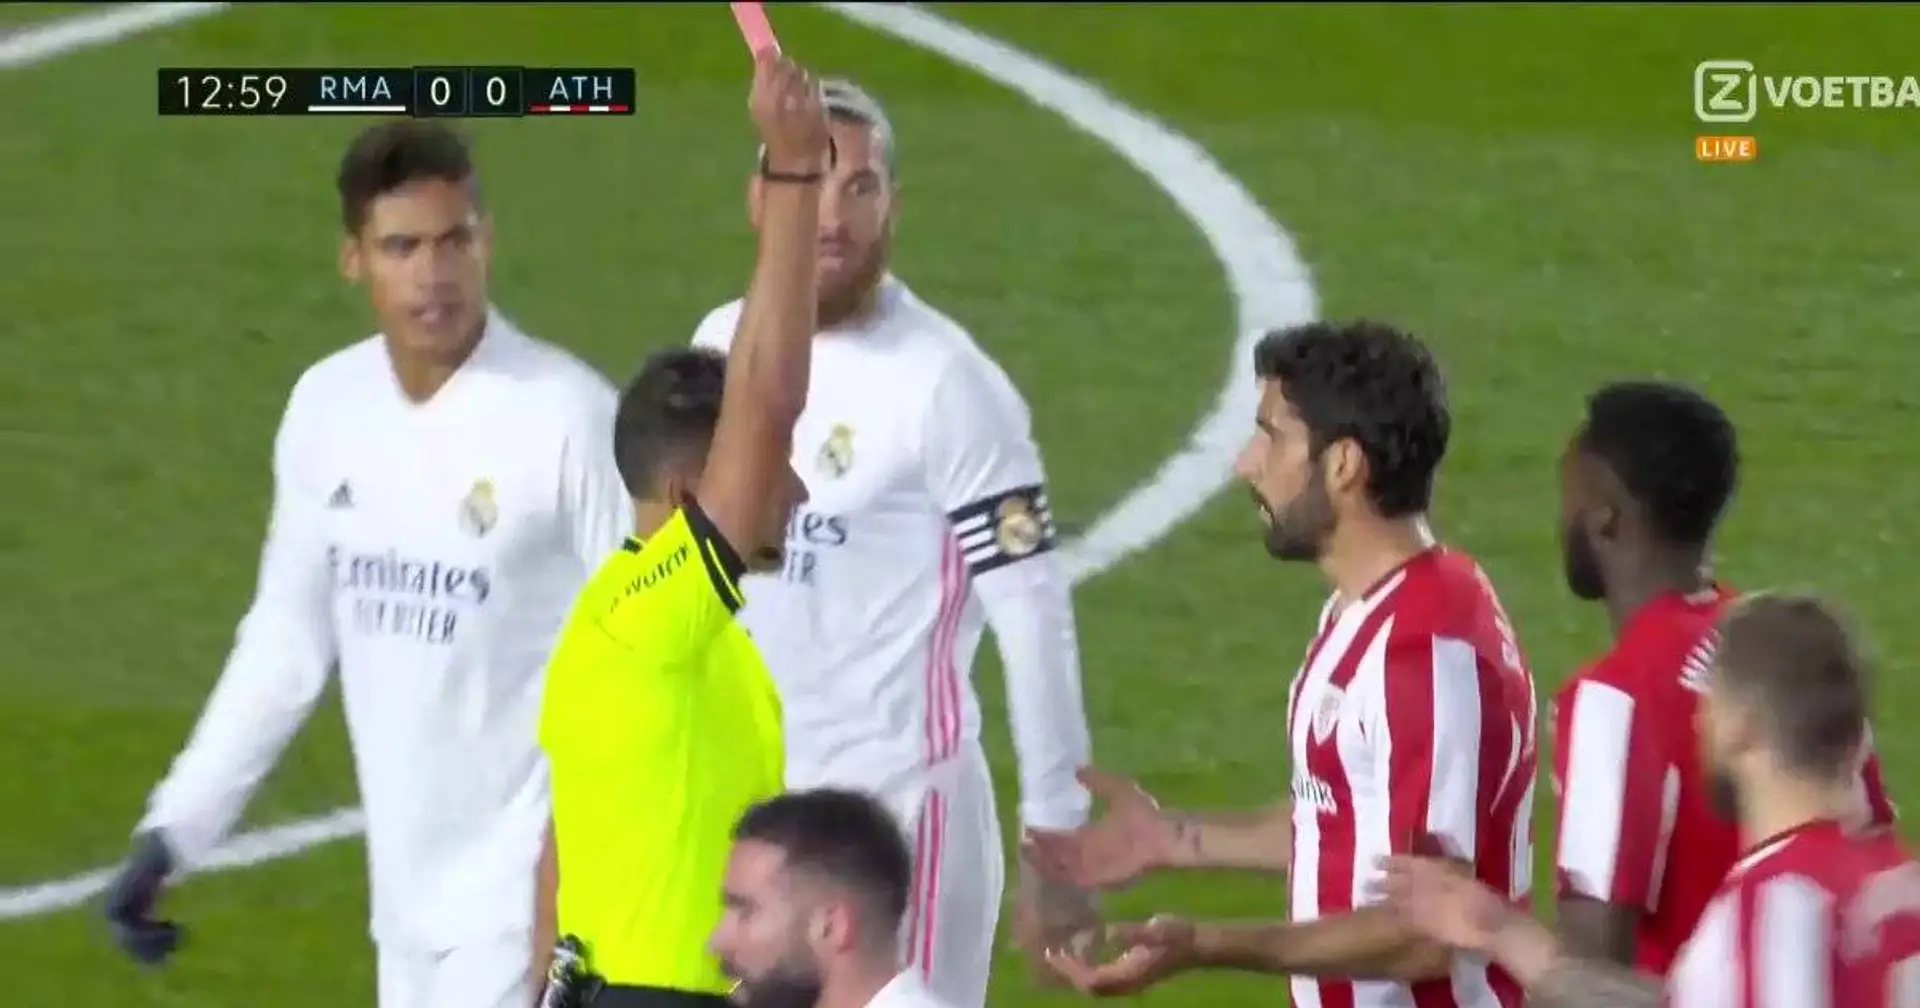 'Absolute clown': Madrid fans troll Raul Garcia who gets sent off in 13th minute after 2 attempts to kill Kroos